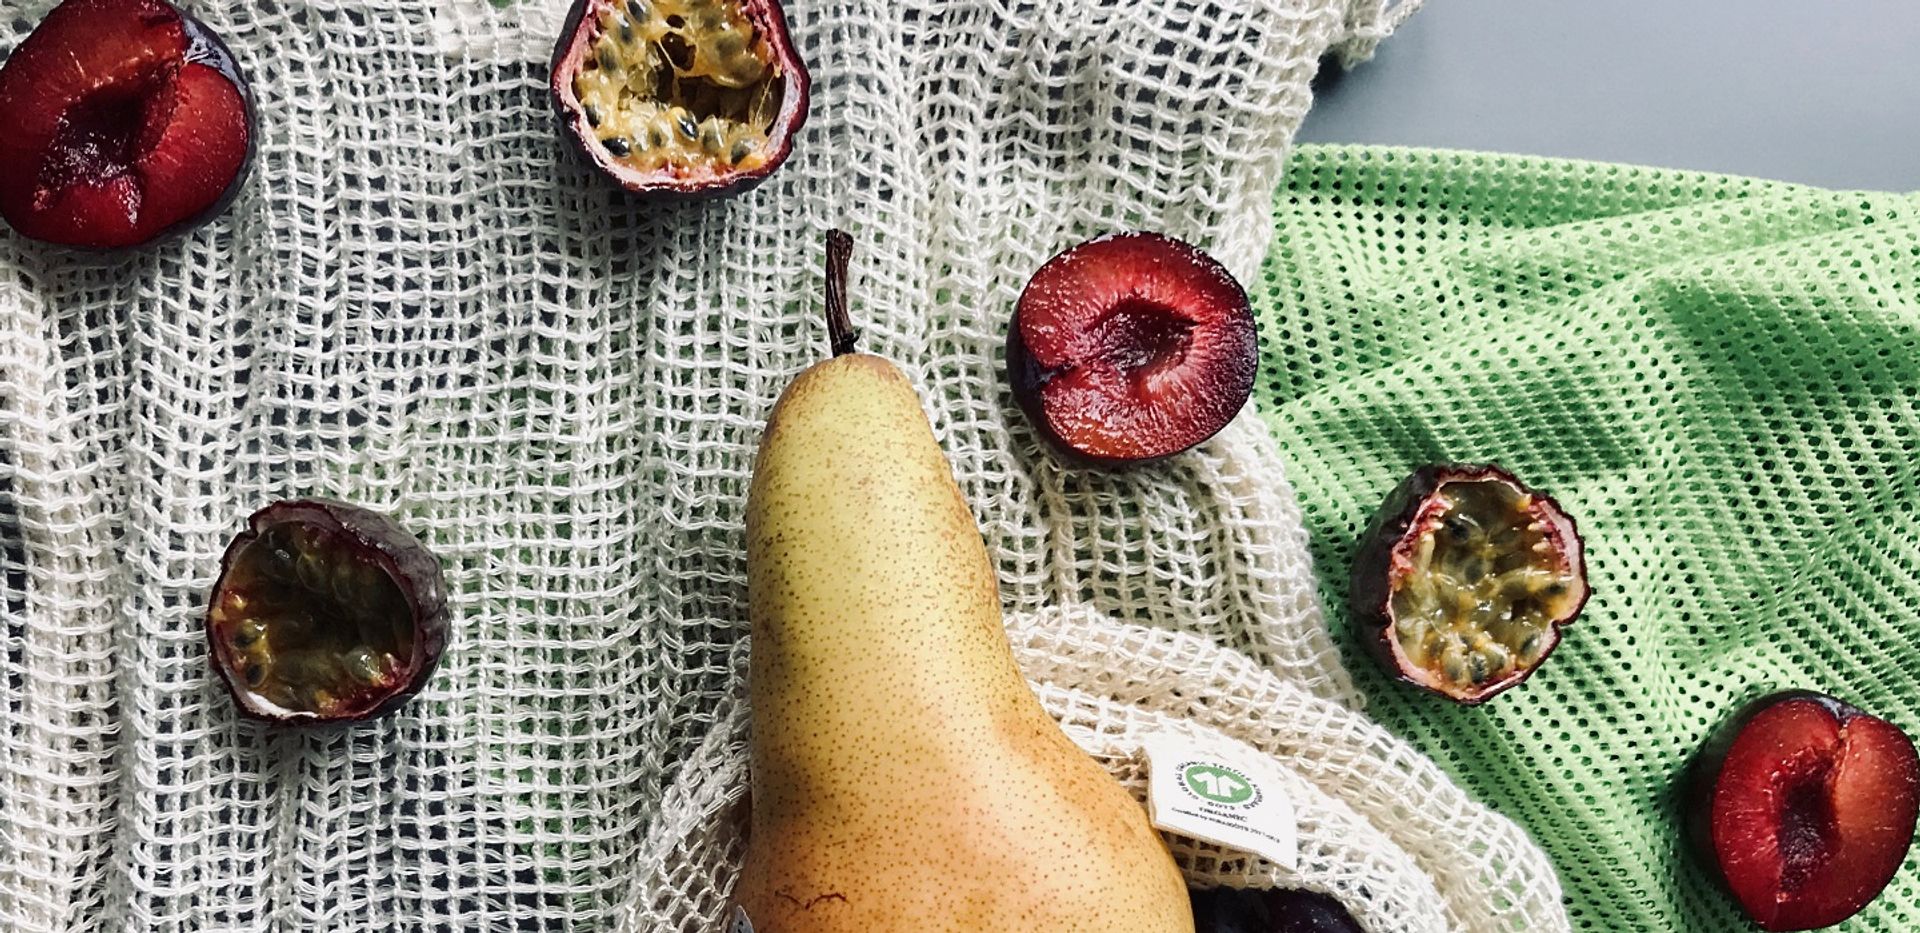 A pear, some passion fruit and cherry halves on a towel.